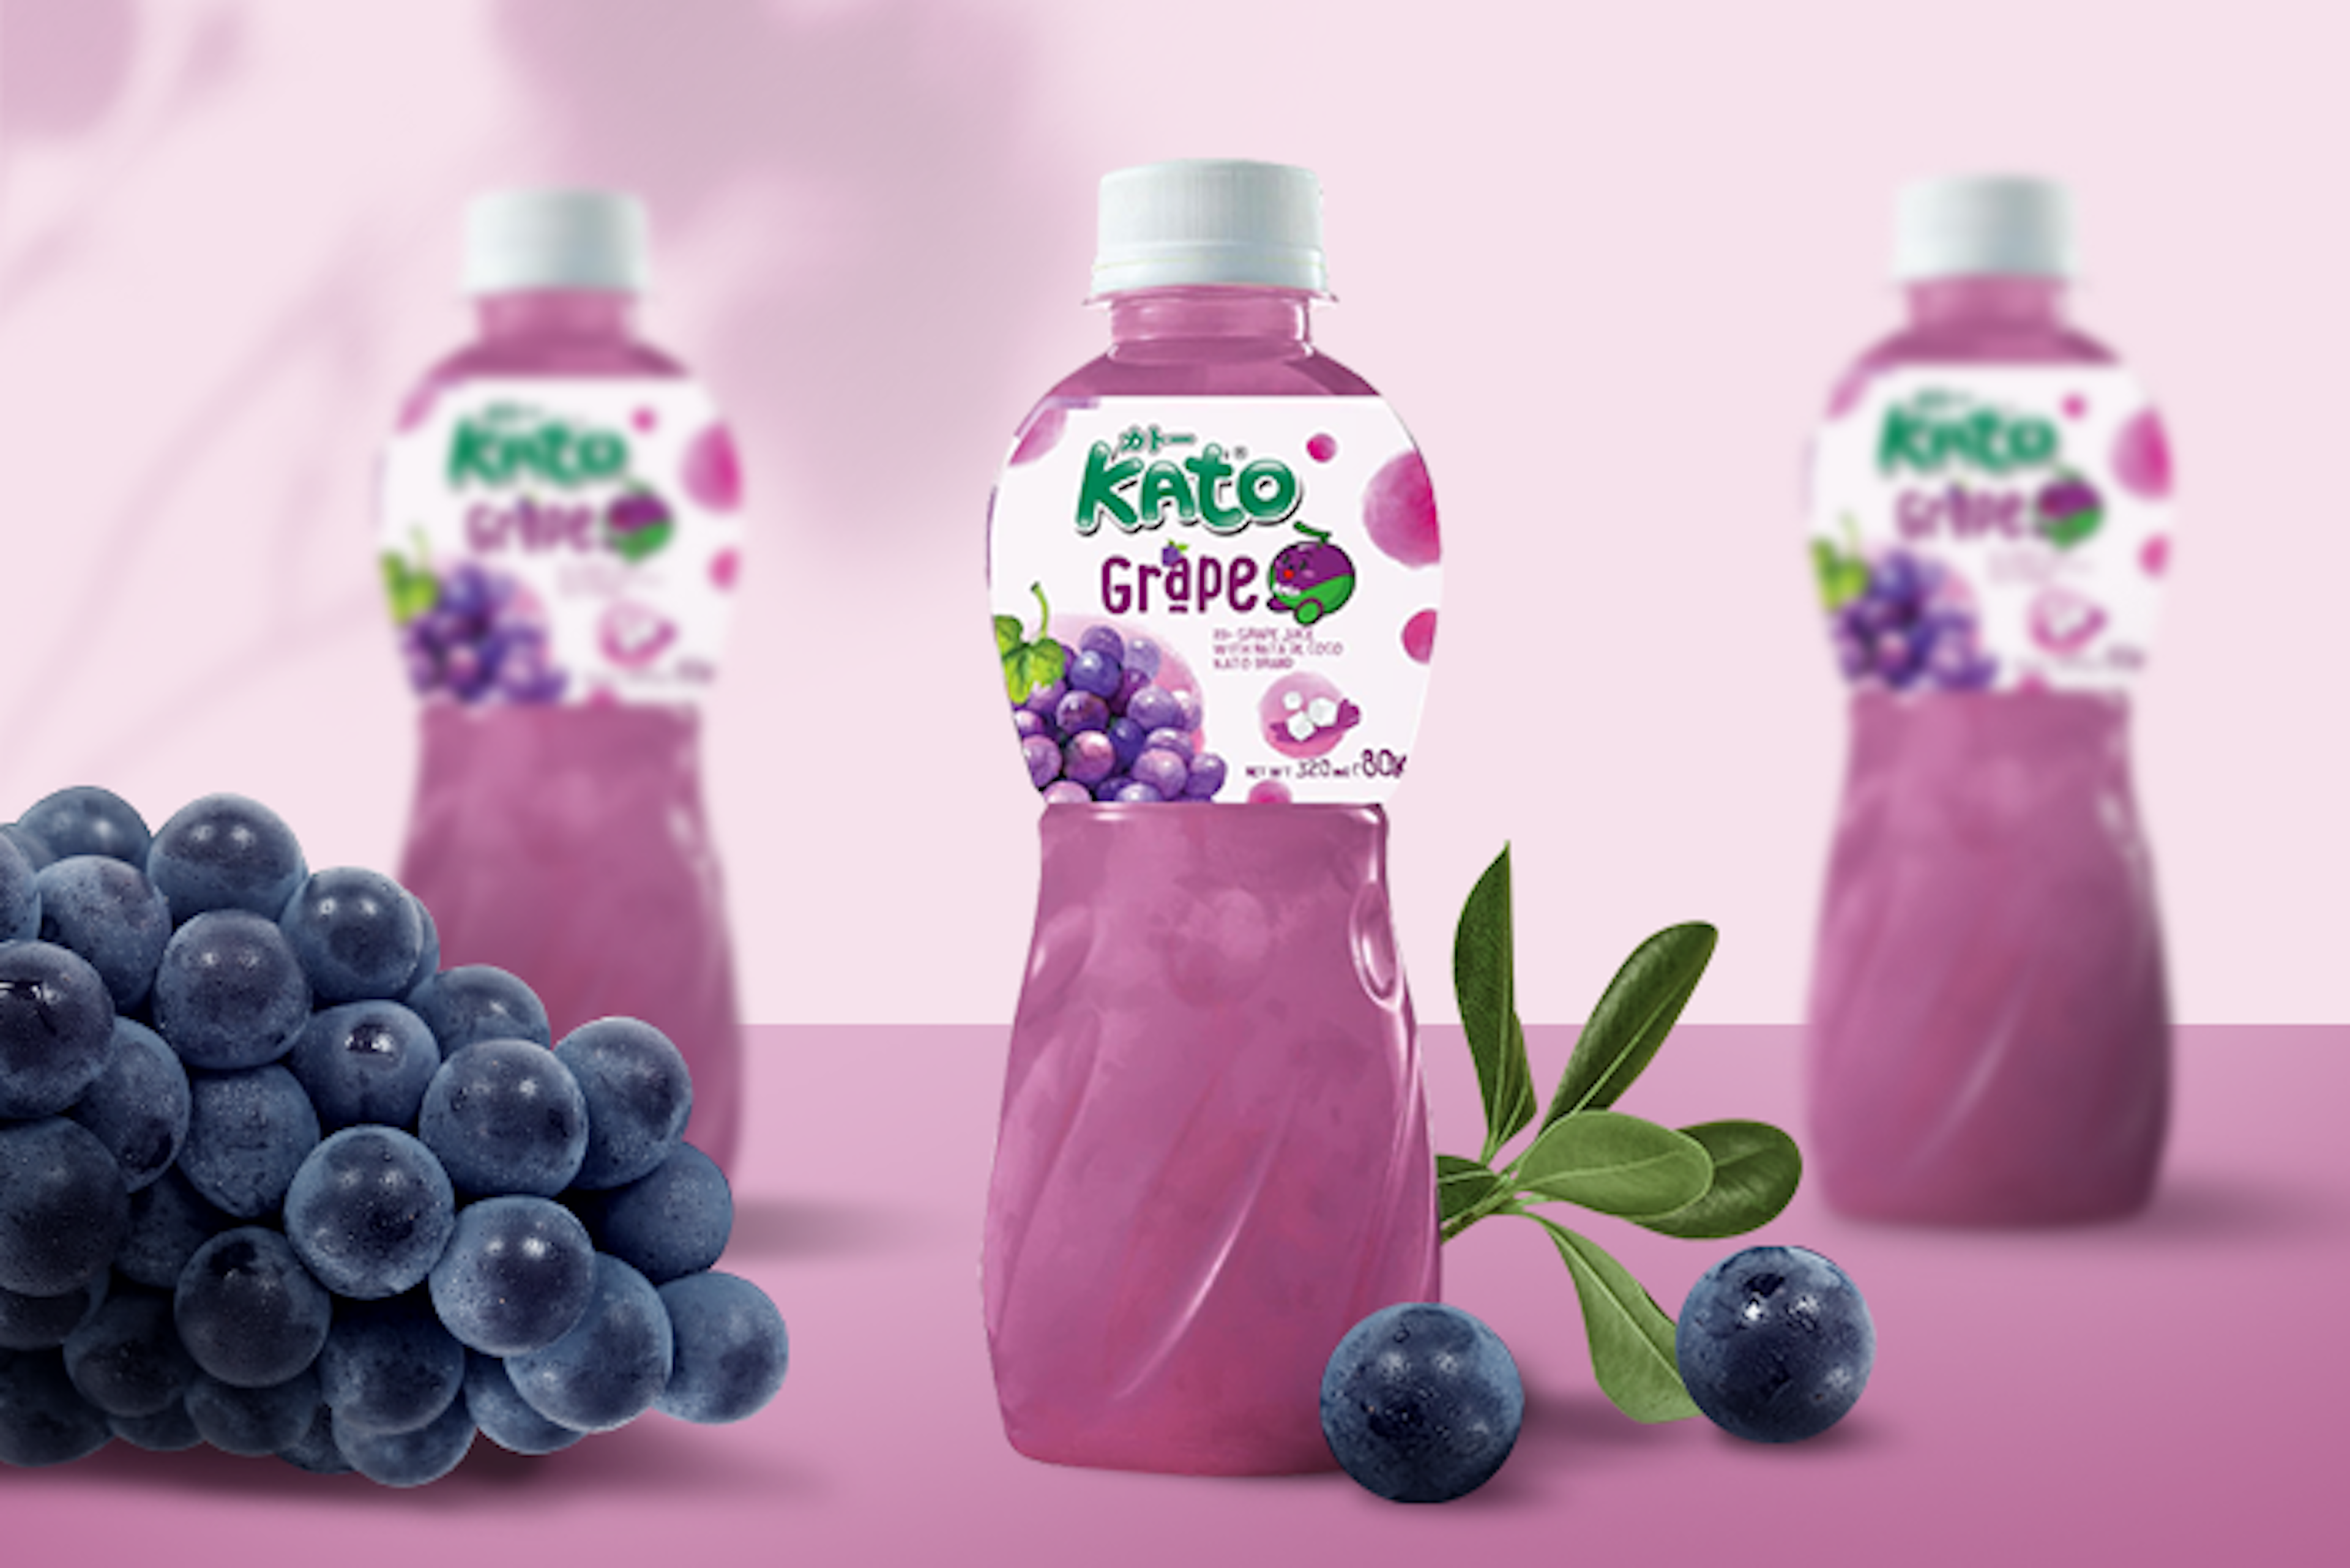 KATO Grape Juice with Nata De Coco 320ml - Refreshing and Fruity Drink